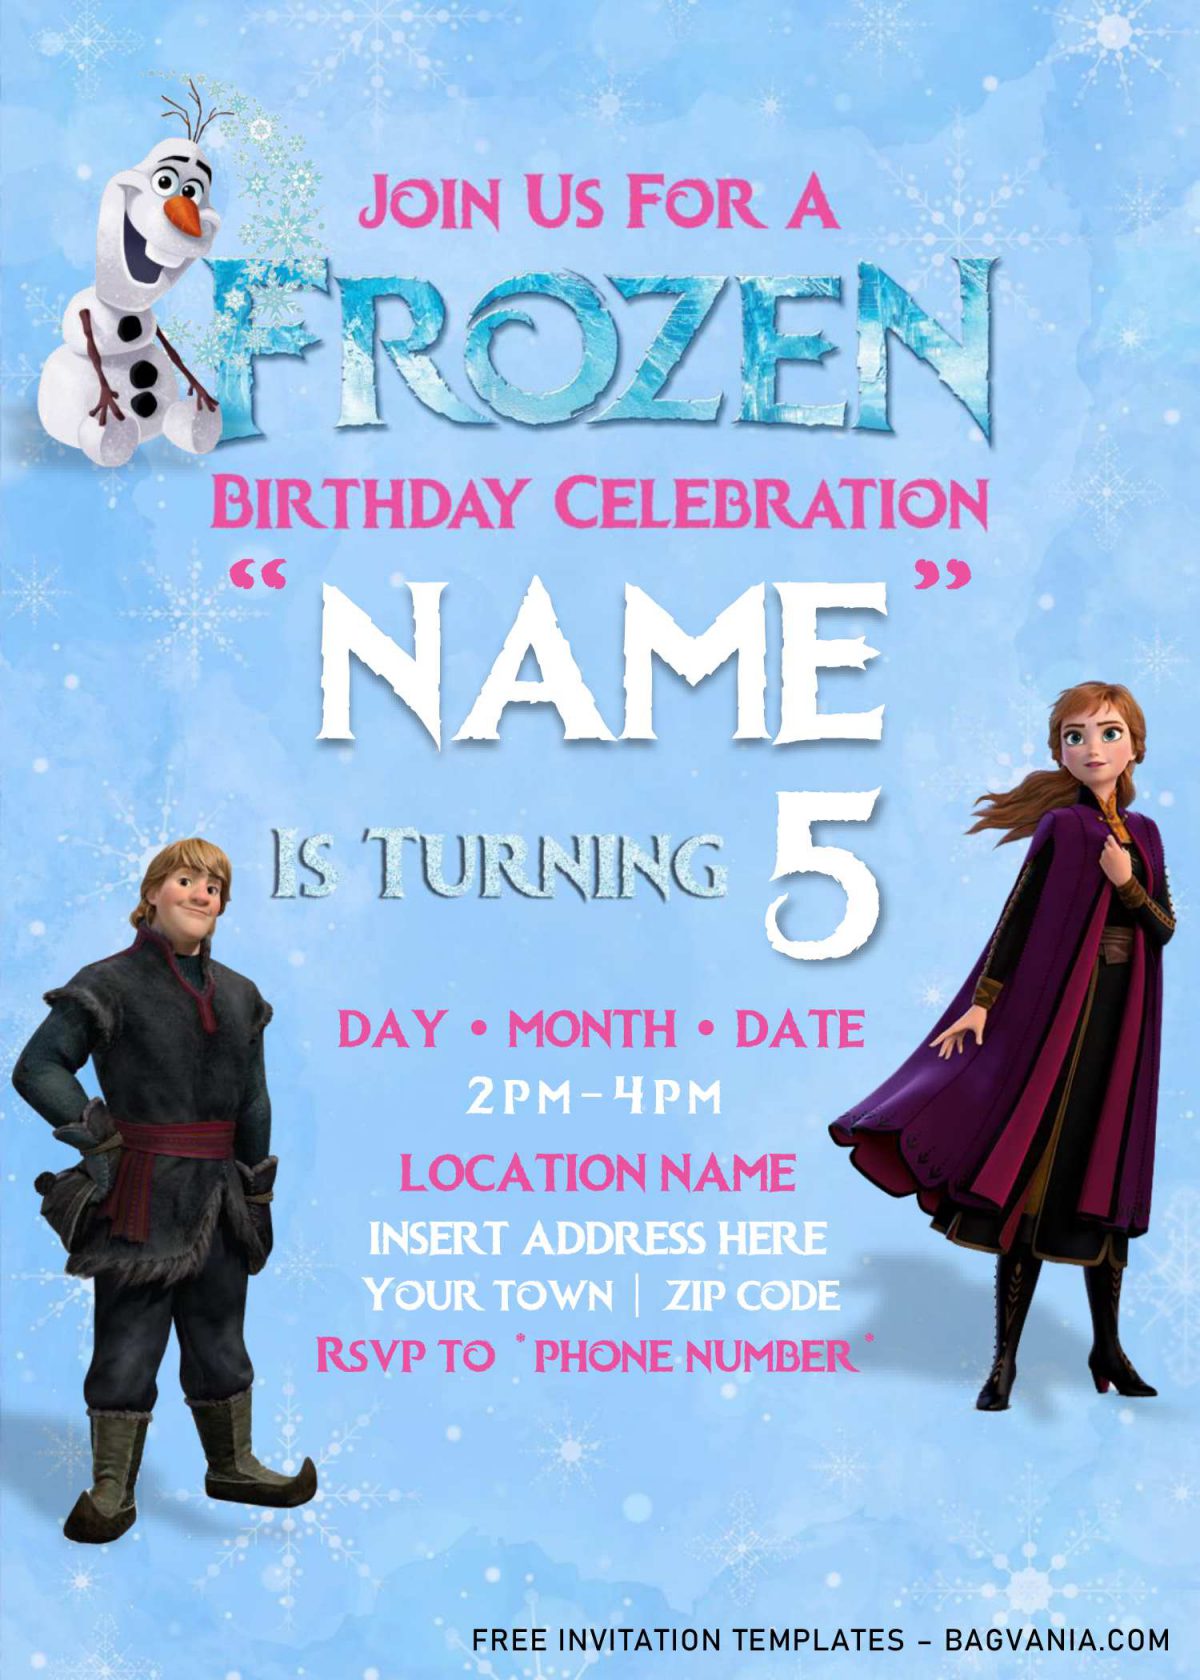 Free Frozen Birthday Invitation Templates For Word and has Portrait design